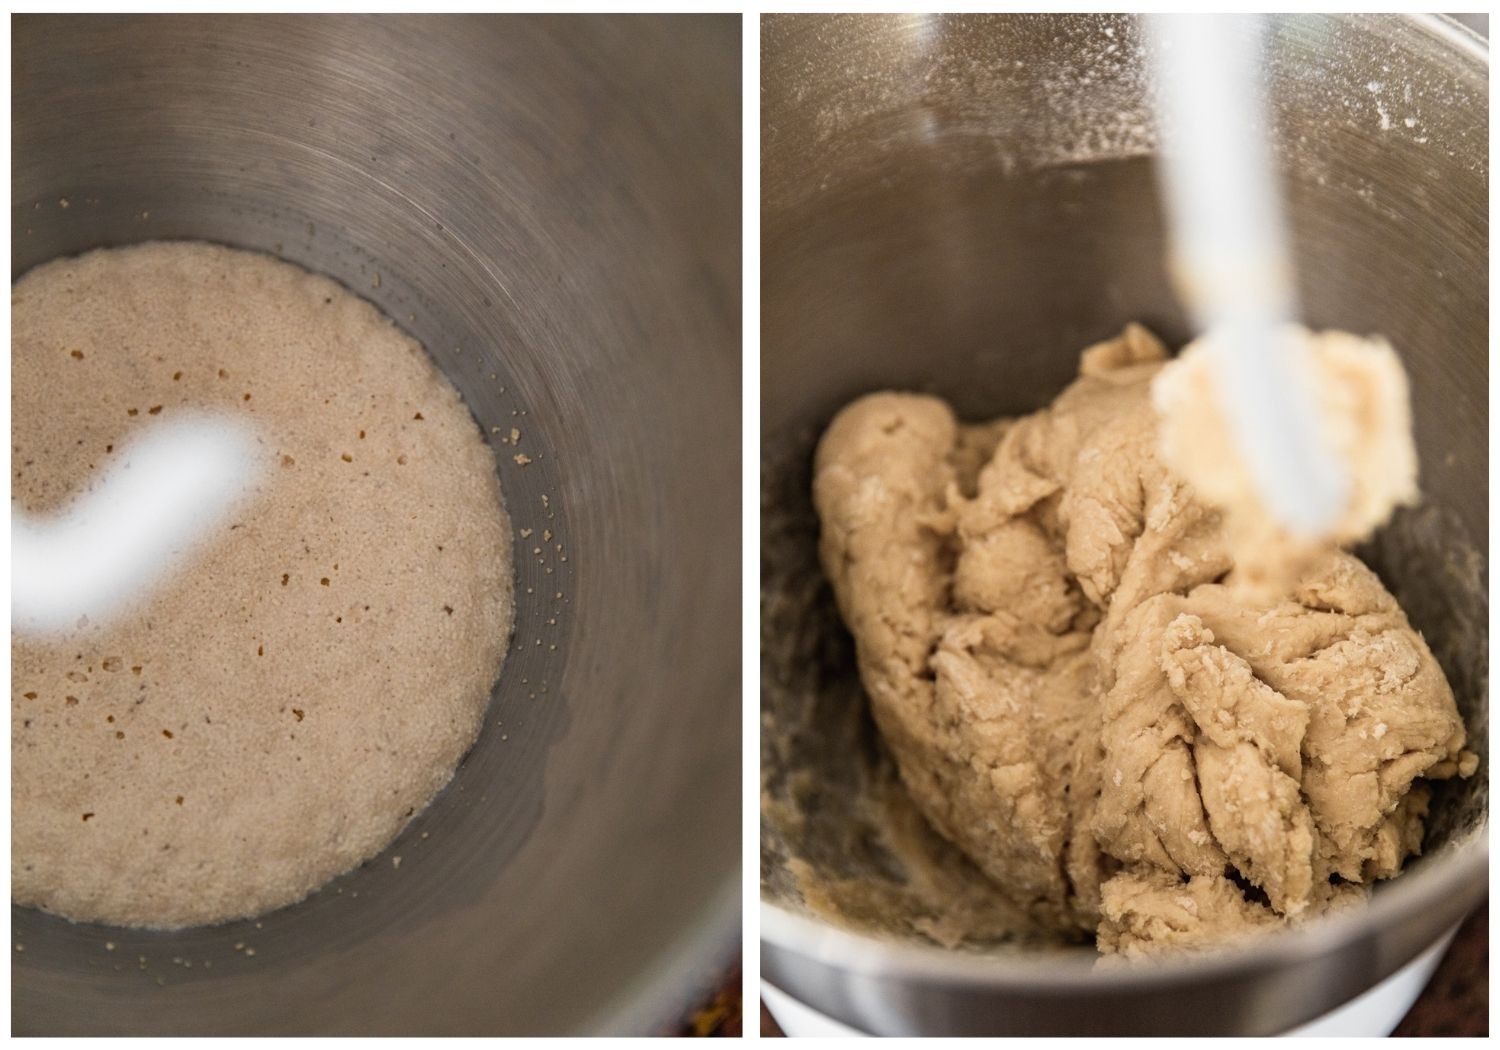 Two images; on the left, a closeup of activated yeast in a silver bowl. On the right, a closeup of finished yeast dough in a silver bowl.